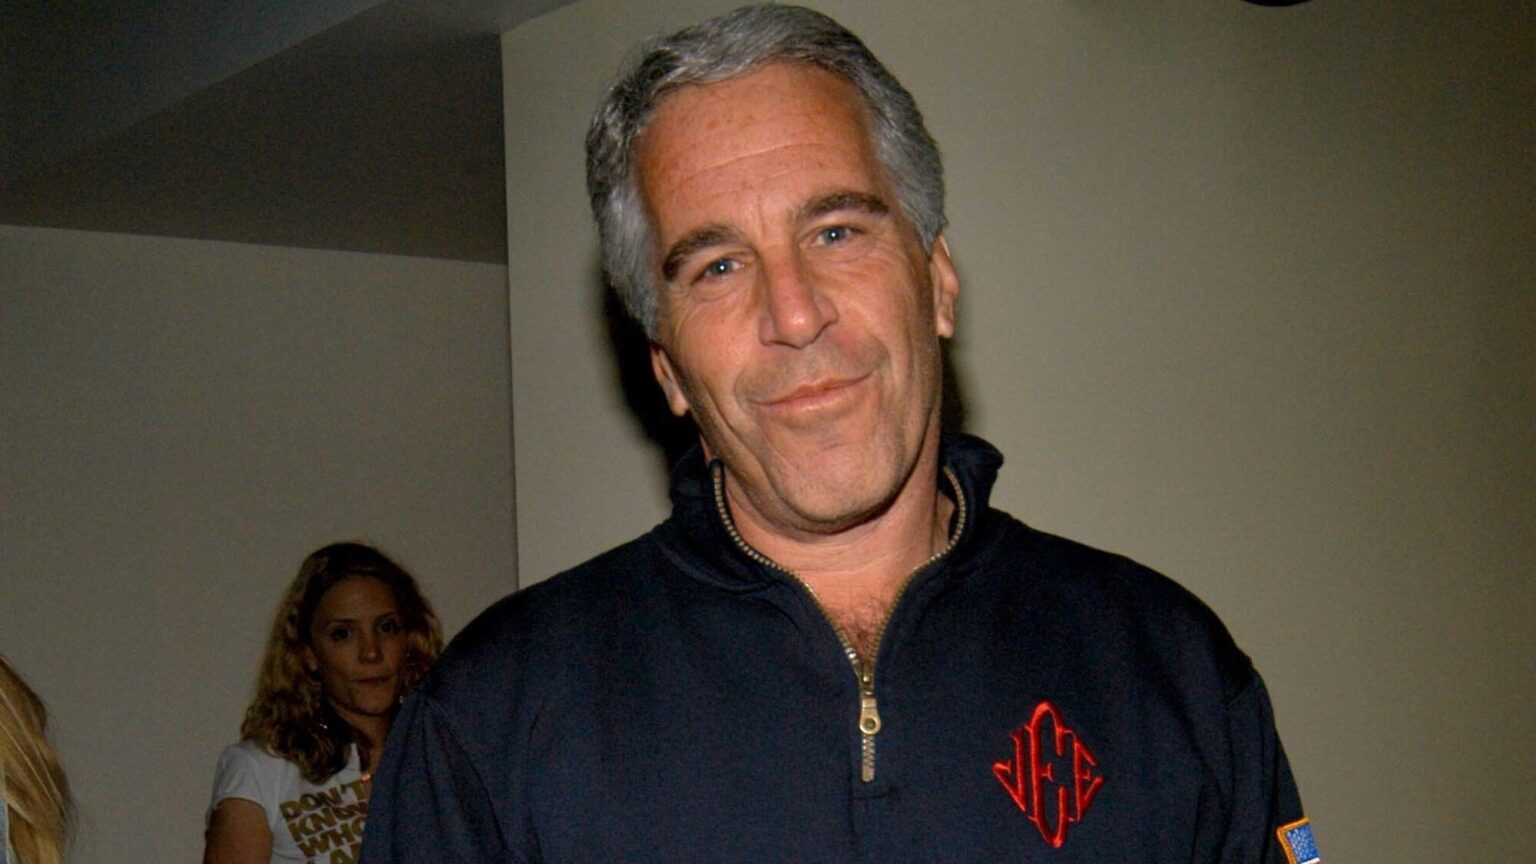 More details about the people who kept contact with Jeffrey Epstein will be revealed. Let's investigate the private island flight logs.